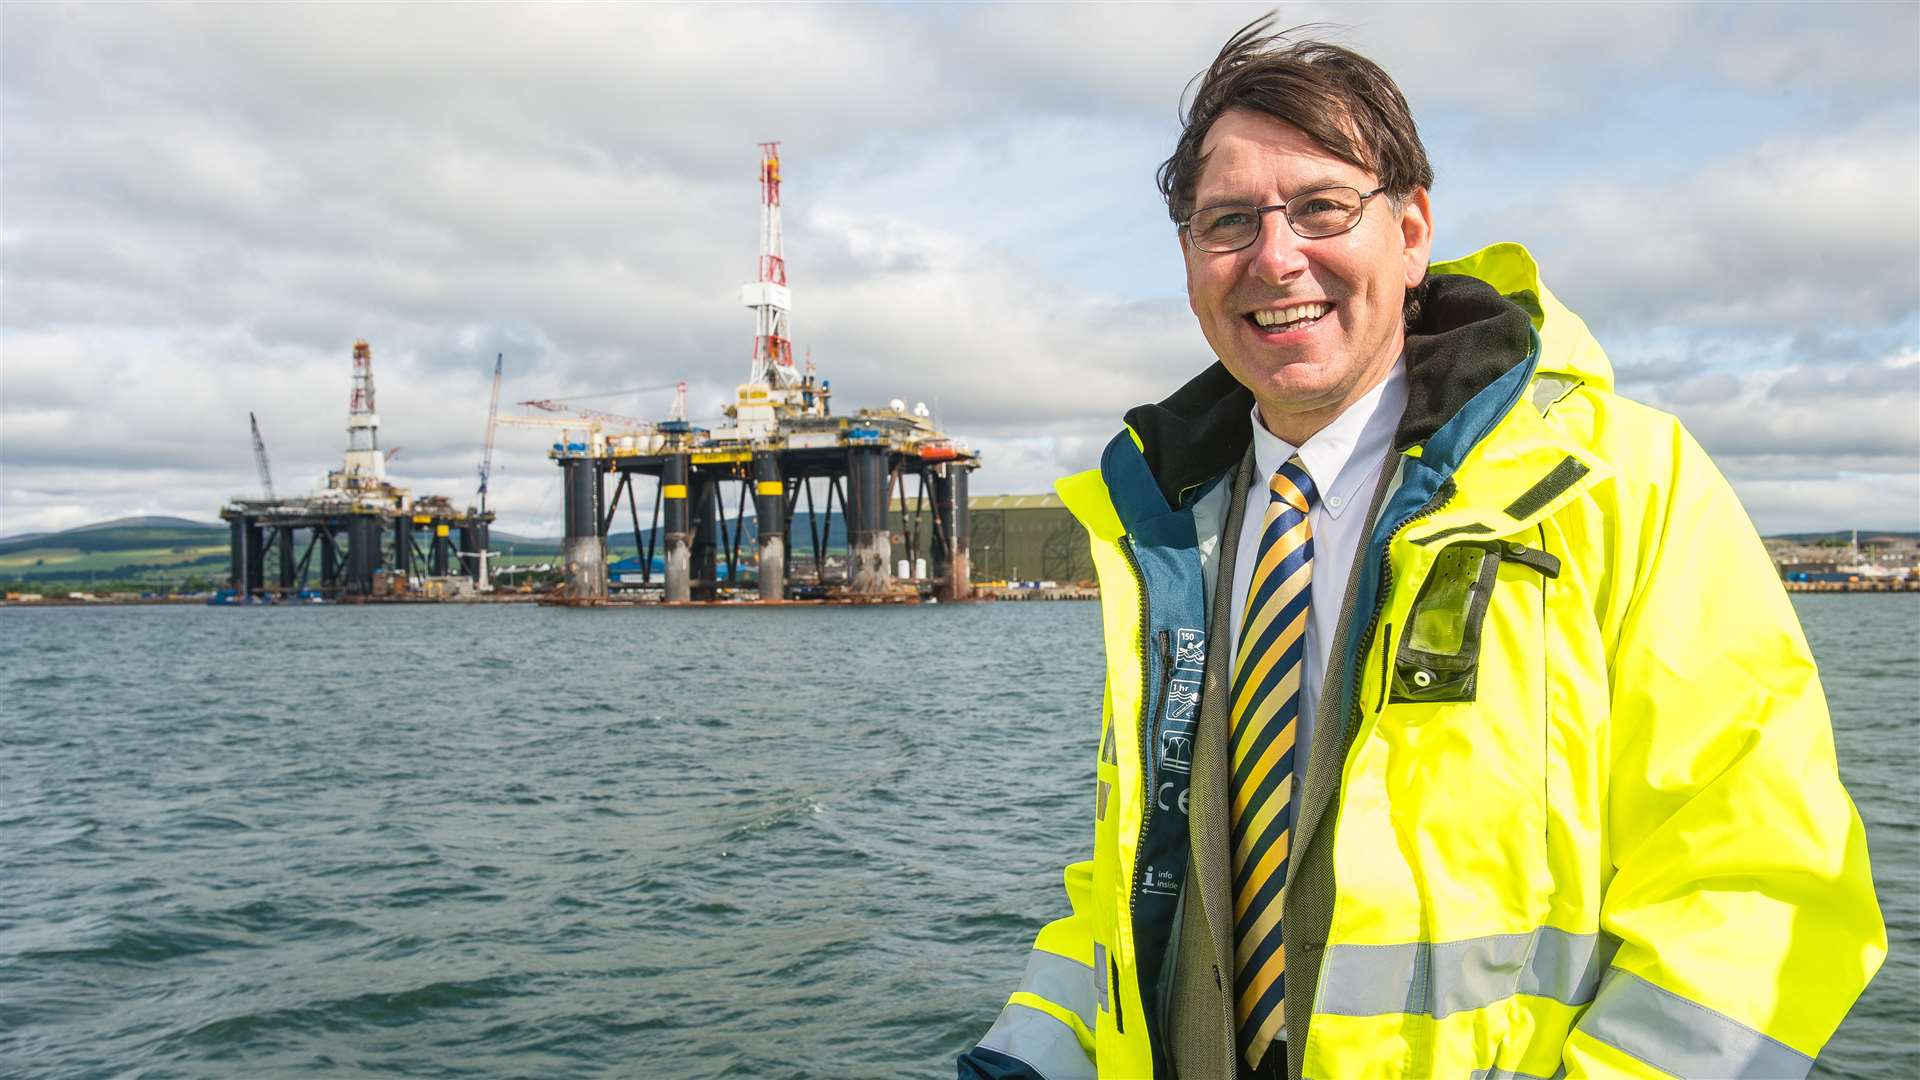 Port chief executive Bob Buskie has previously pointed to the economic benefit the area enjoys from port activities.